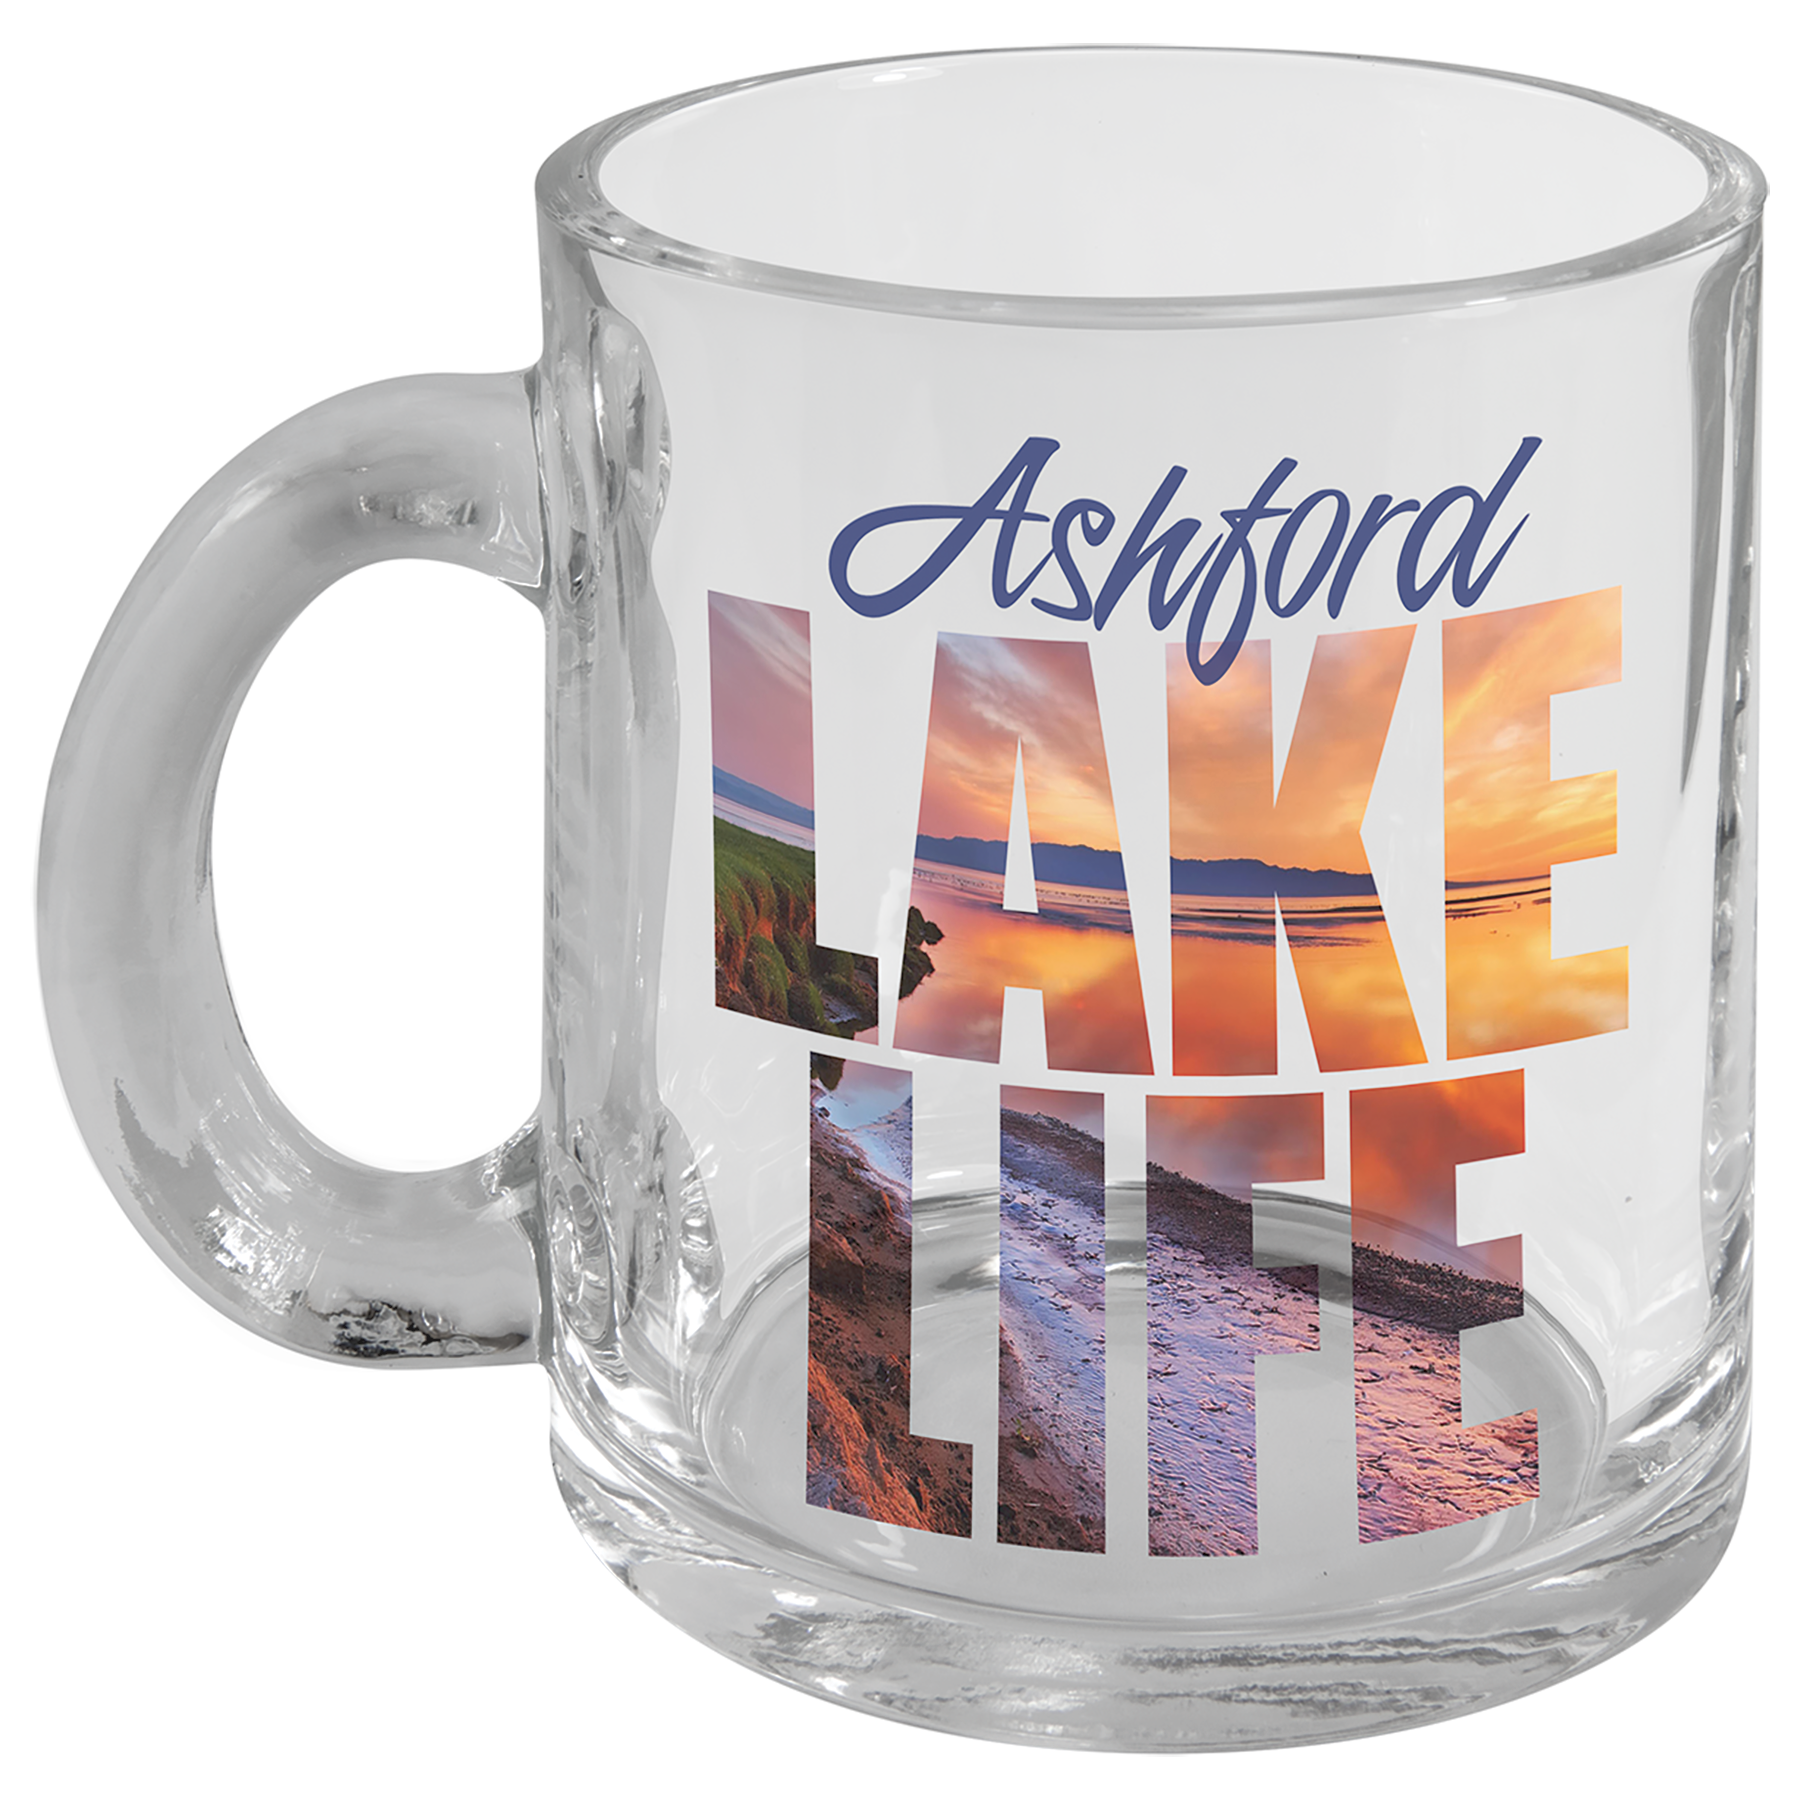 10 oz. Stainless Steel Sublimation Coffee Mug with Wire Handle